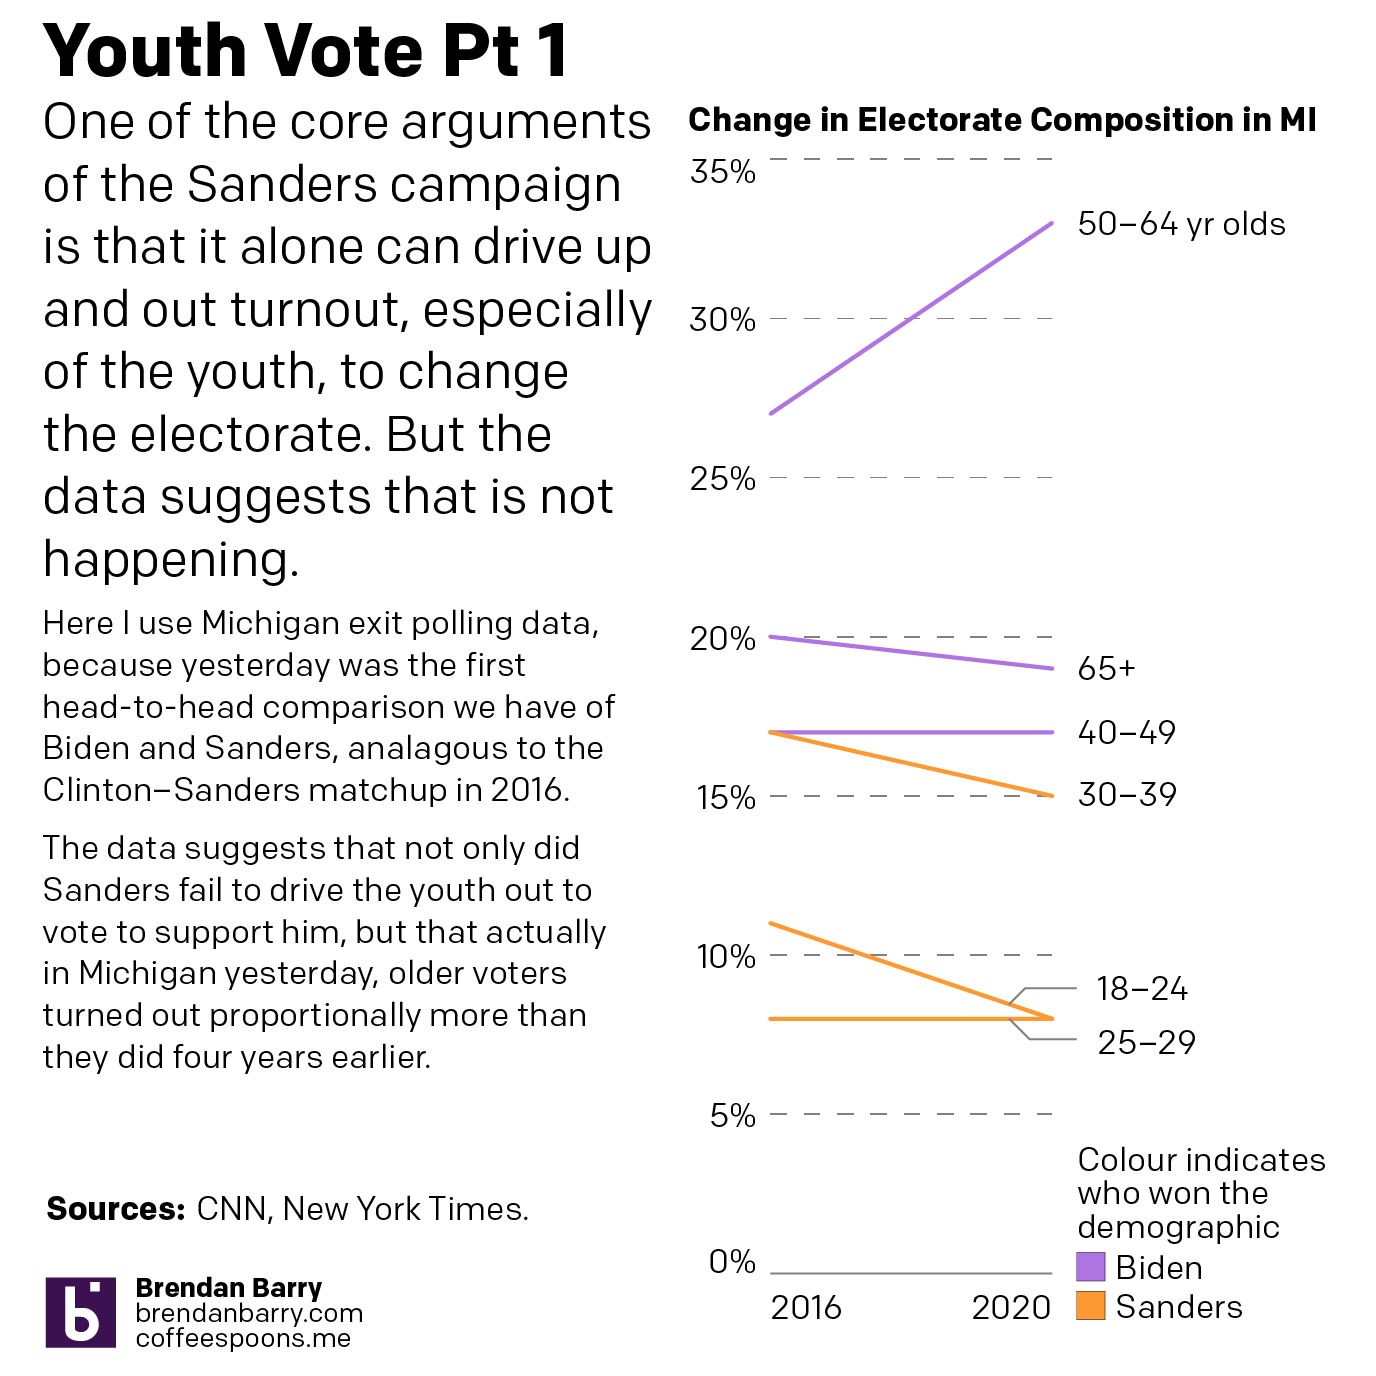 In Michigan the youth vote was largely down, though a tarnished silver lining would be 25–29 year olds held steady